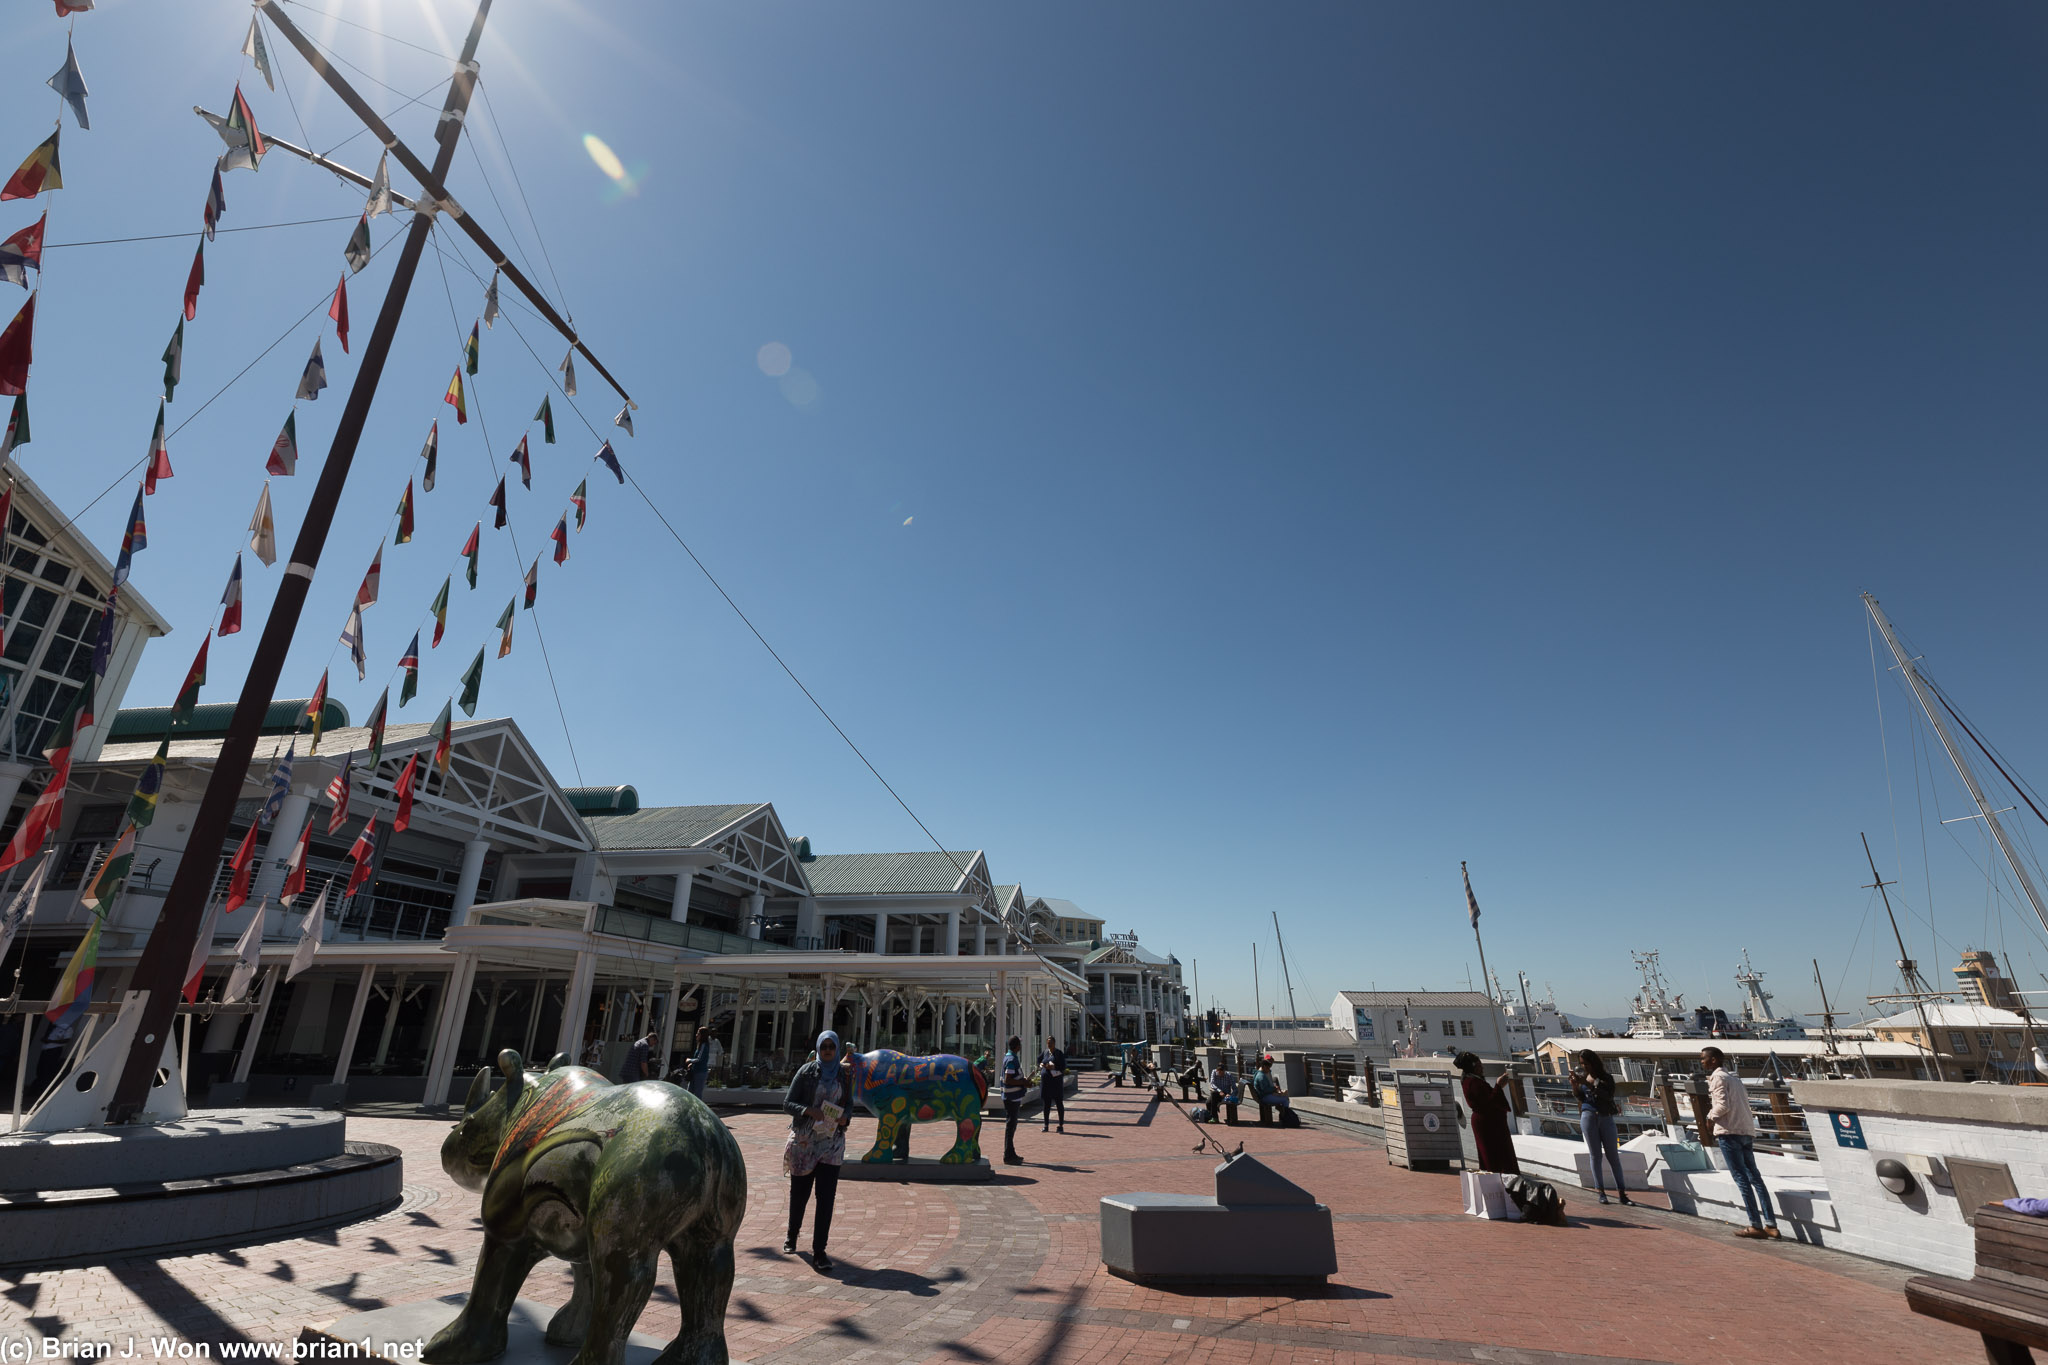 V&A Waterfront.